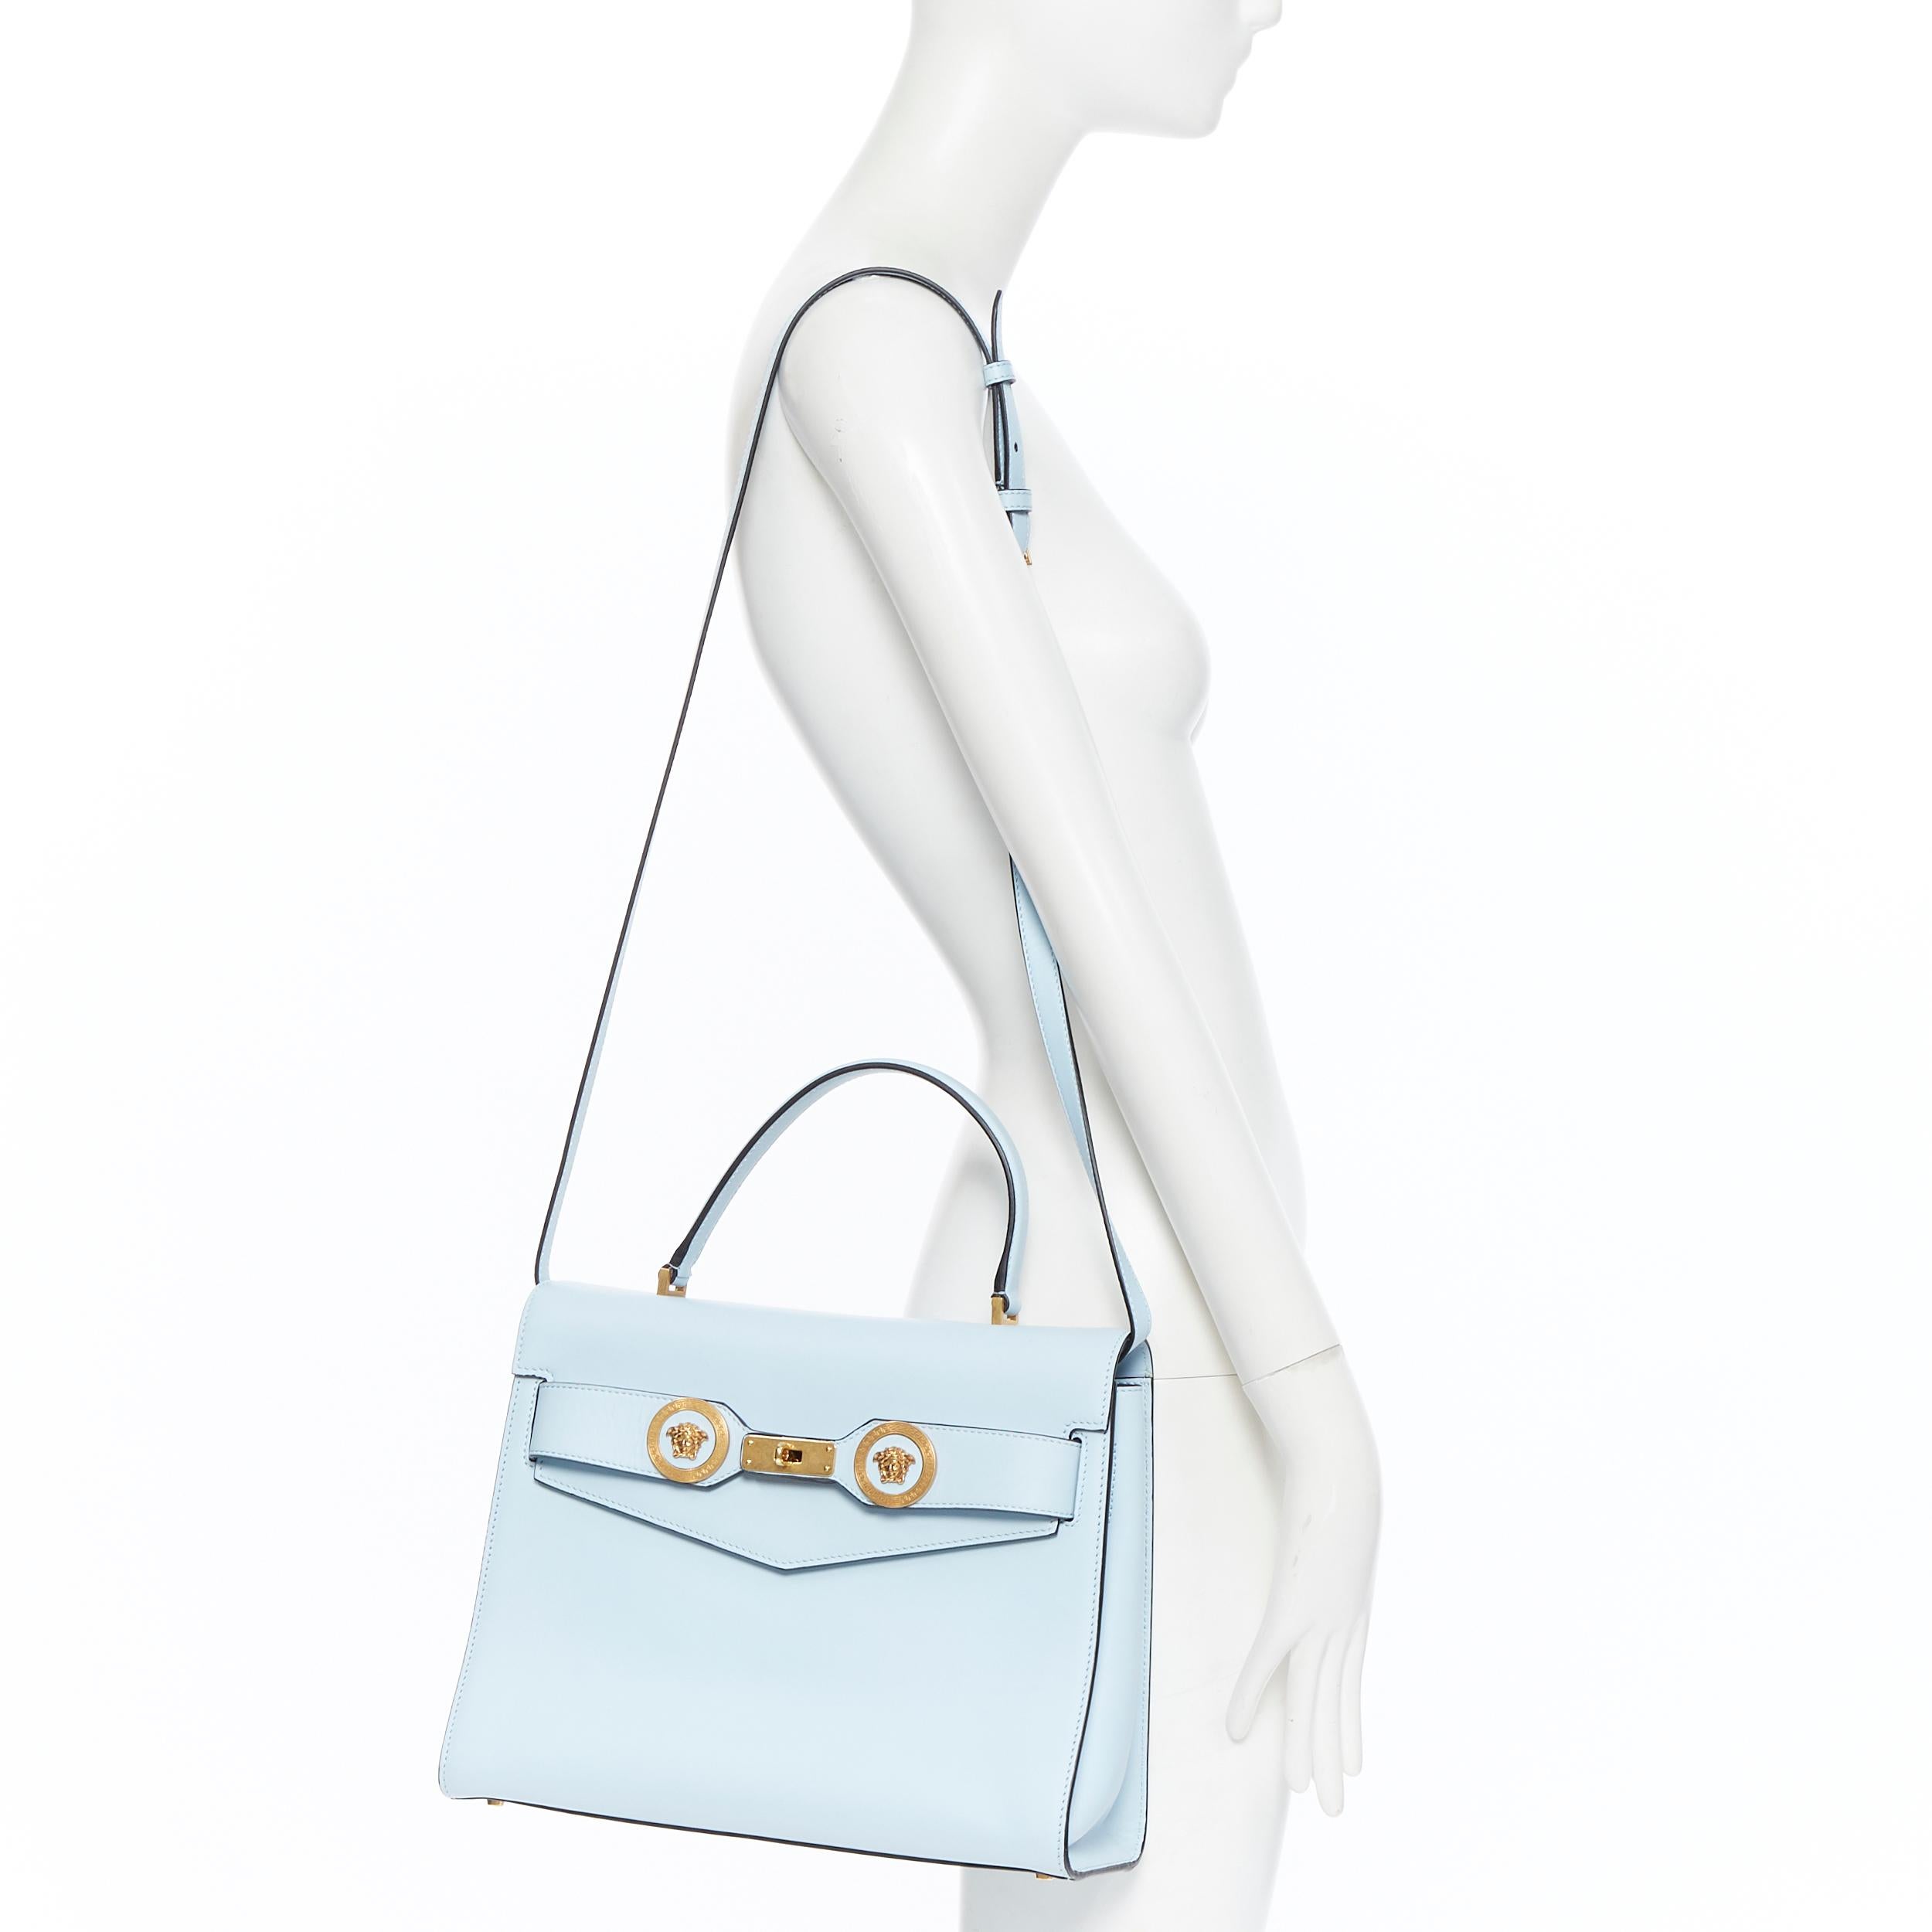 new VERSACE SS18 Runway sky blue Medusa strap Large Icon Kelly shoulder bag
Brand: Versace
Designer: Donatella Versace
Collection: Spring Summer 2018
Model Name / Style: Icon satchel
Material: Leather
Color: Blue
Pattern: Solid
Closure: Clasp
Lining